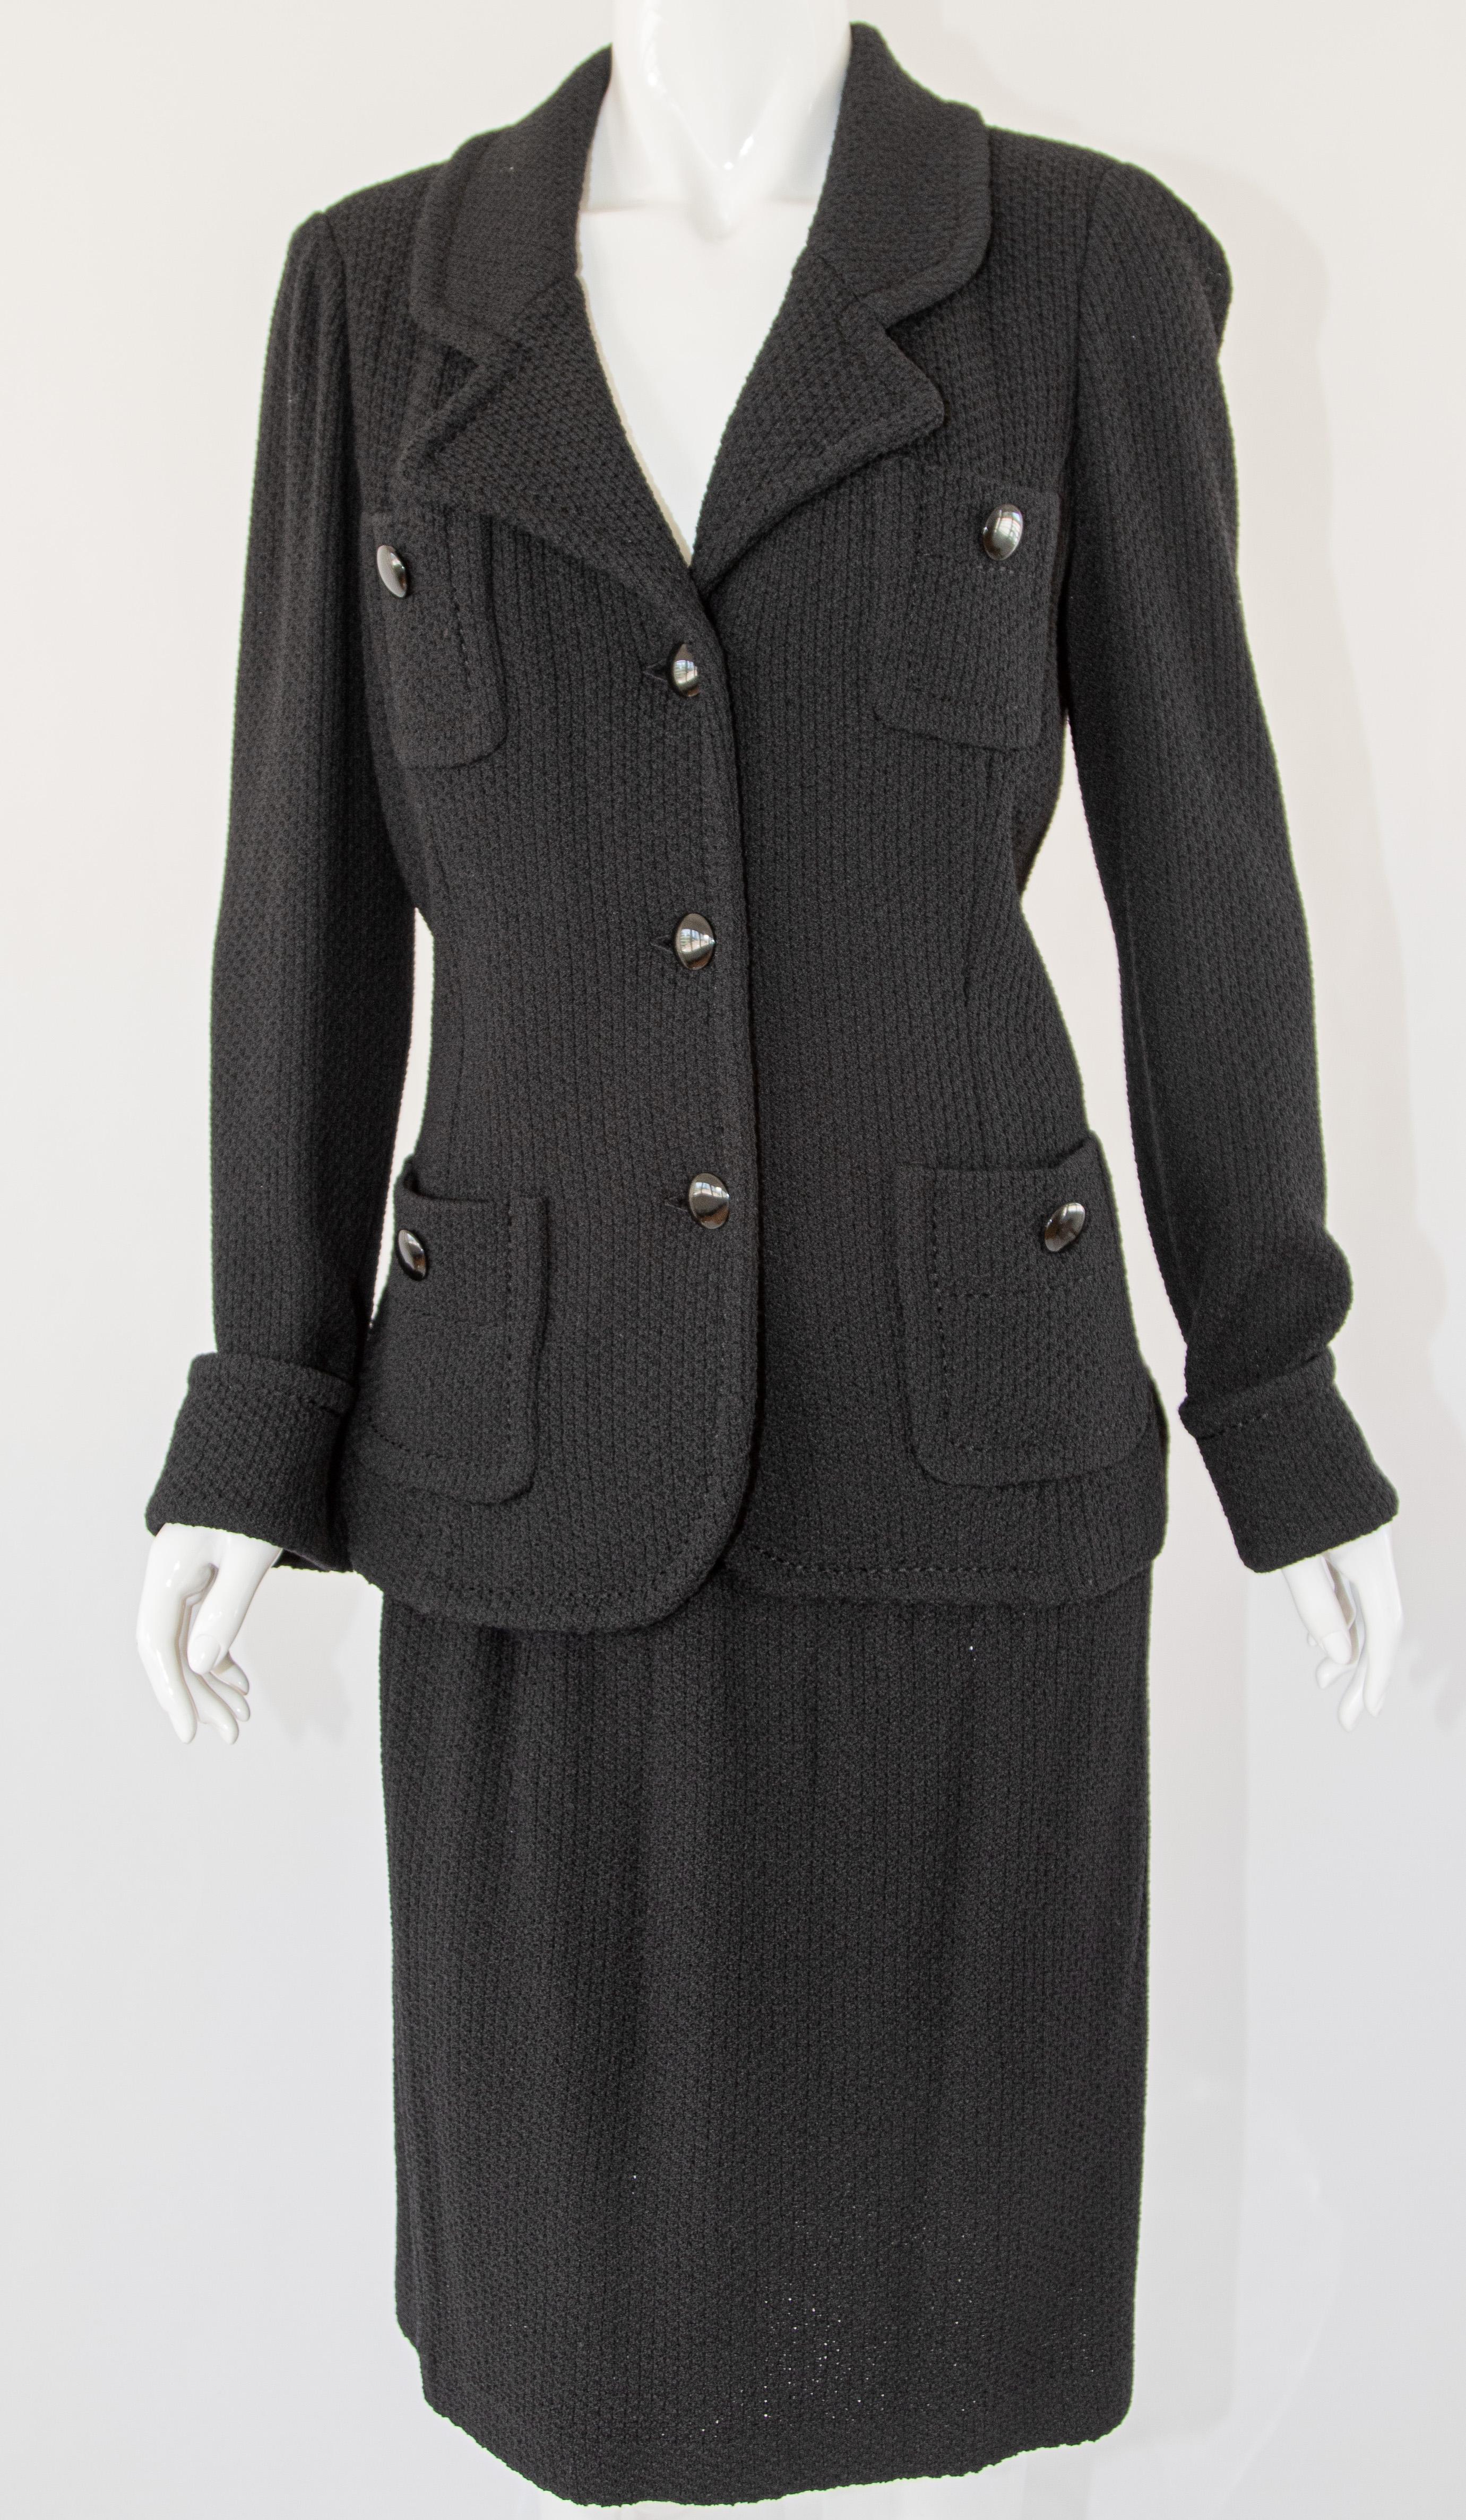 Vintage St John Caviar Black Knit Wool Blazer and Skirt Suit In Good Condition For Sale In North Hollywood, CA